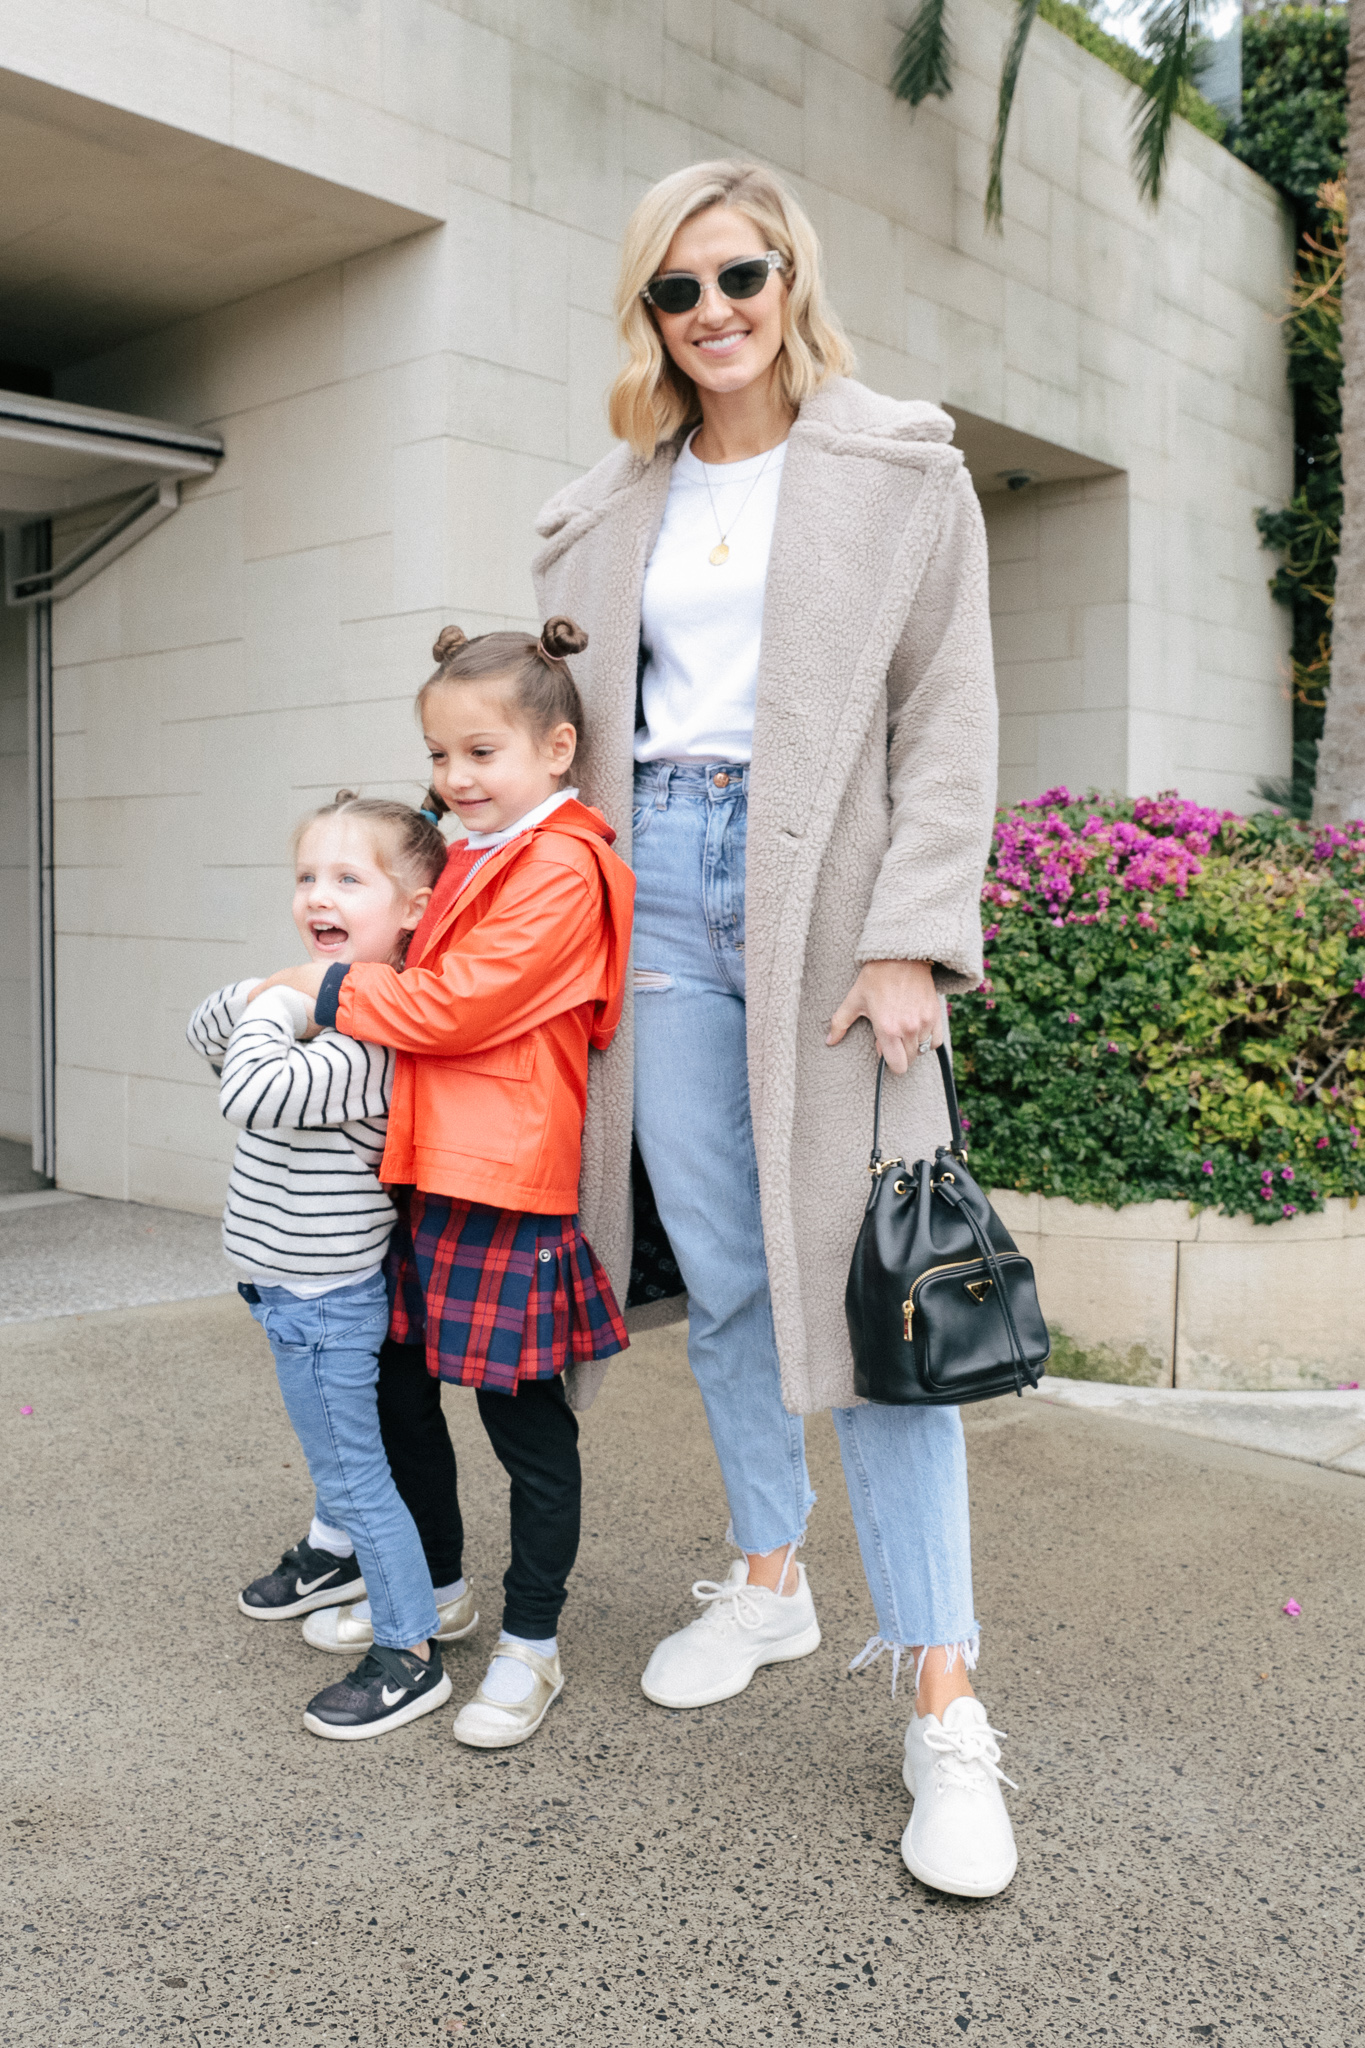 Post-pregnancy style: how to find yours - Kate Waterhouse